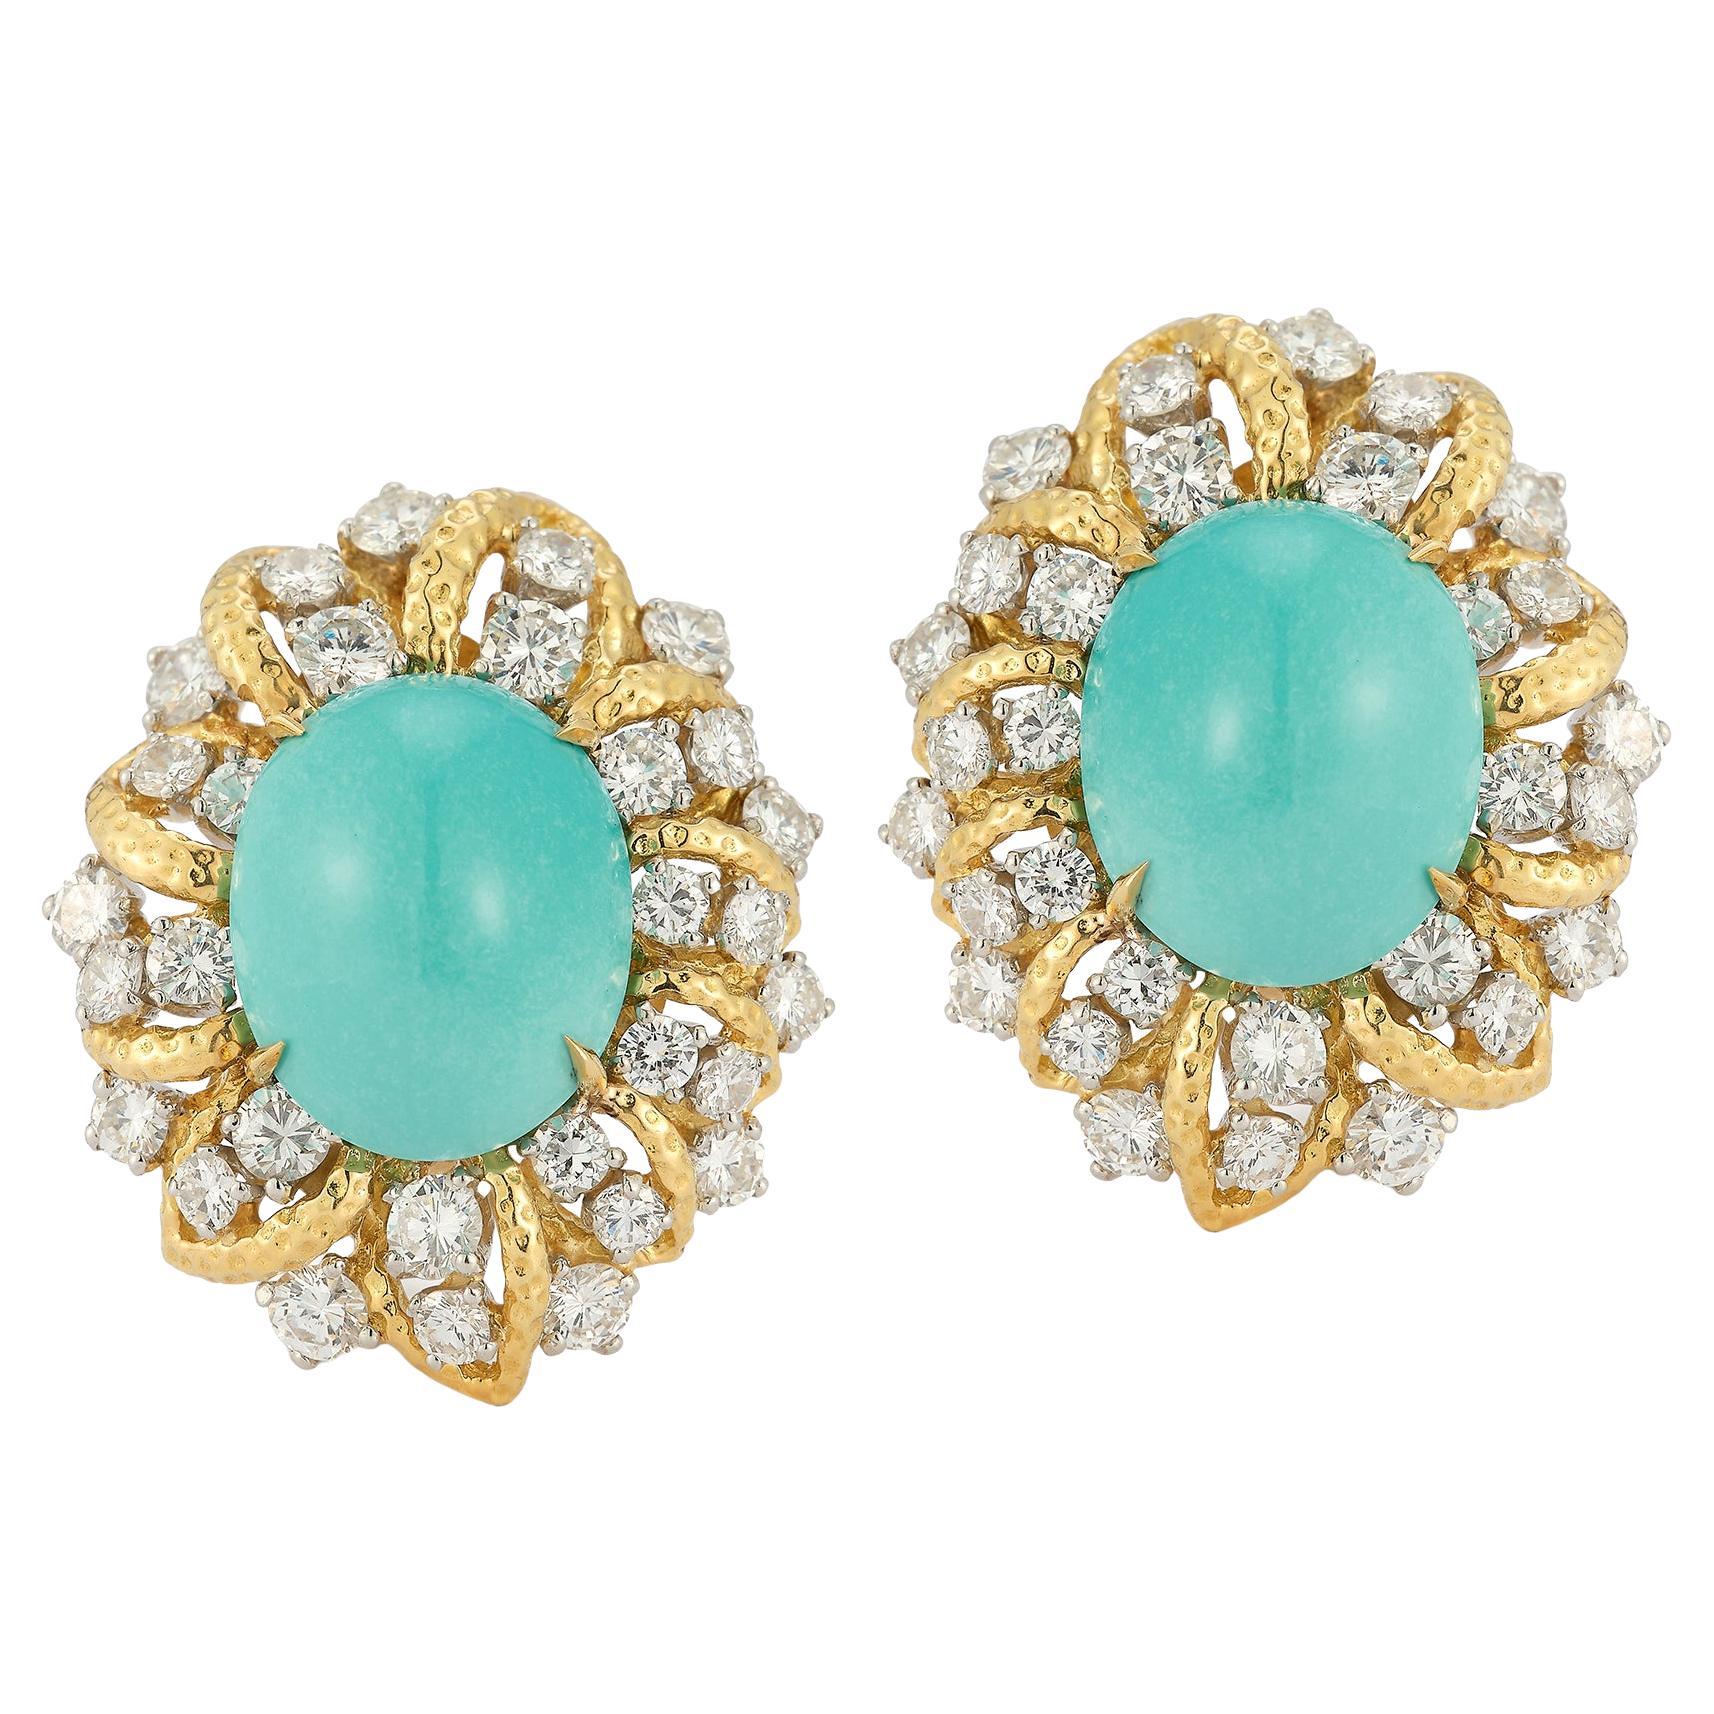 Turquoise and Diamond Earrings by David Webb